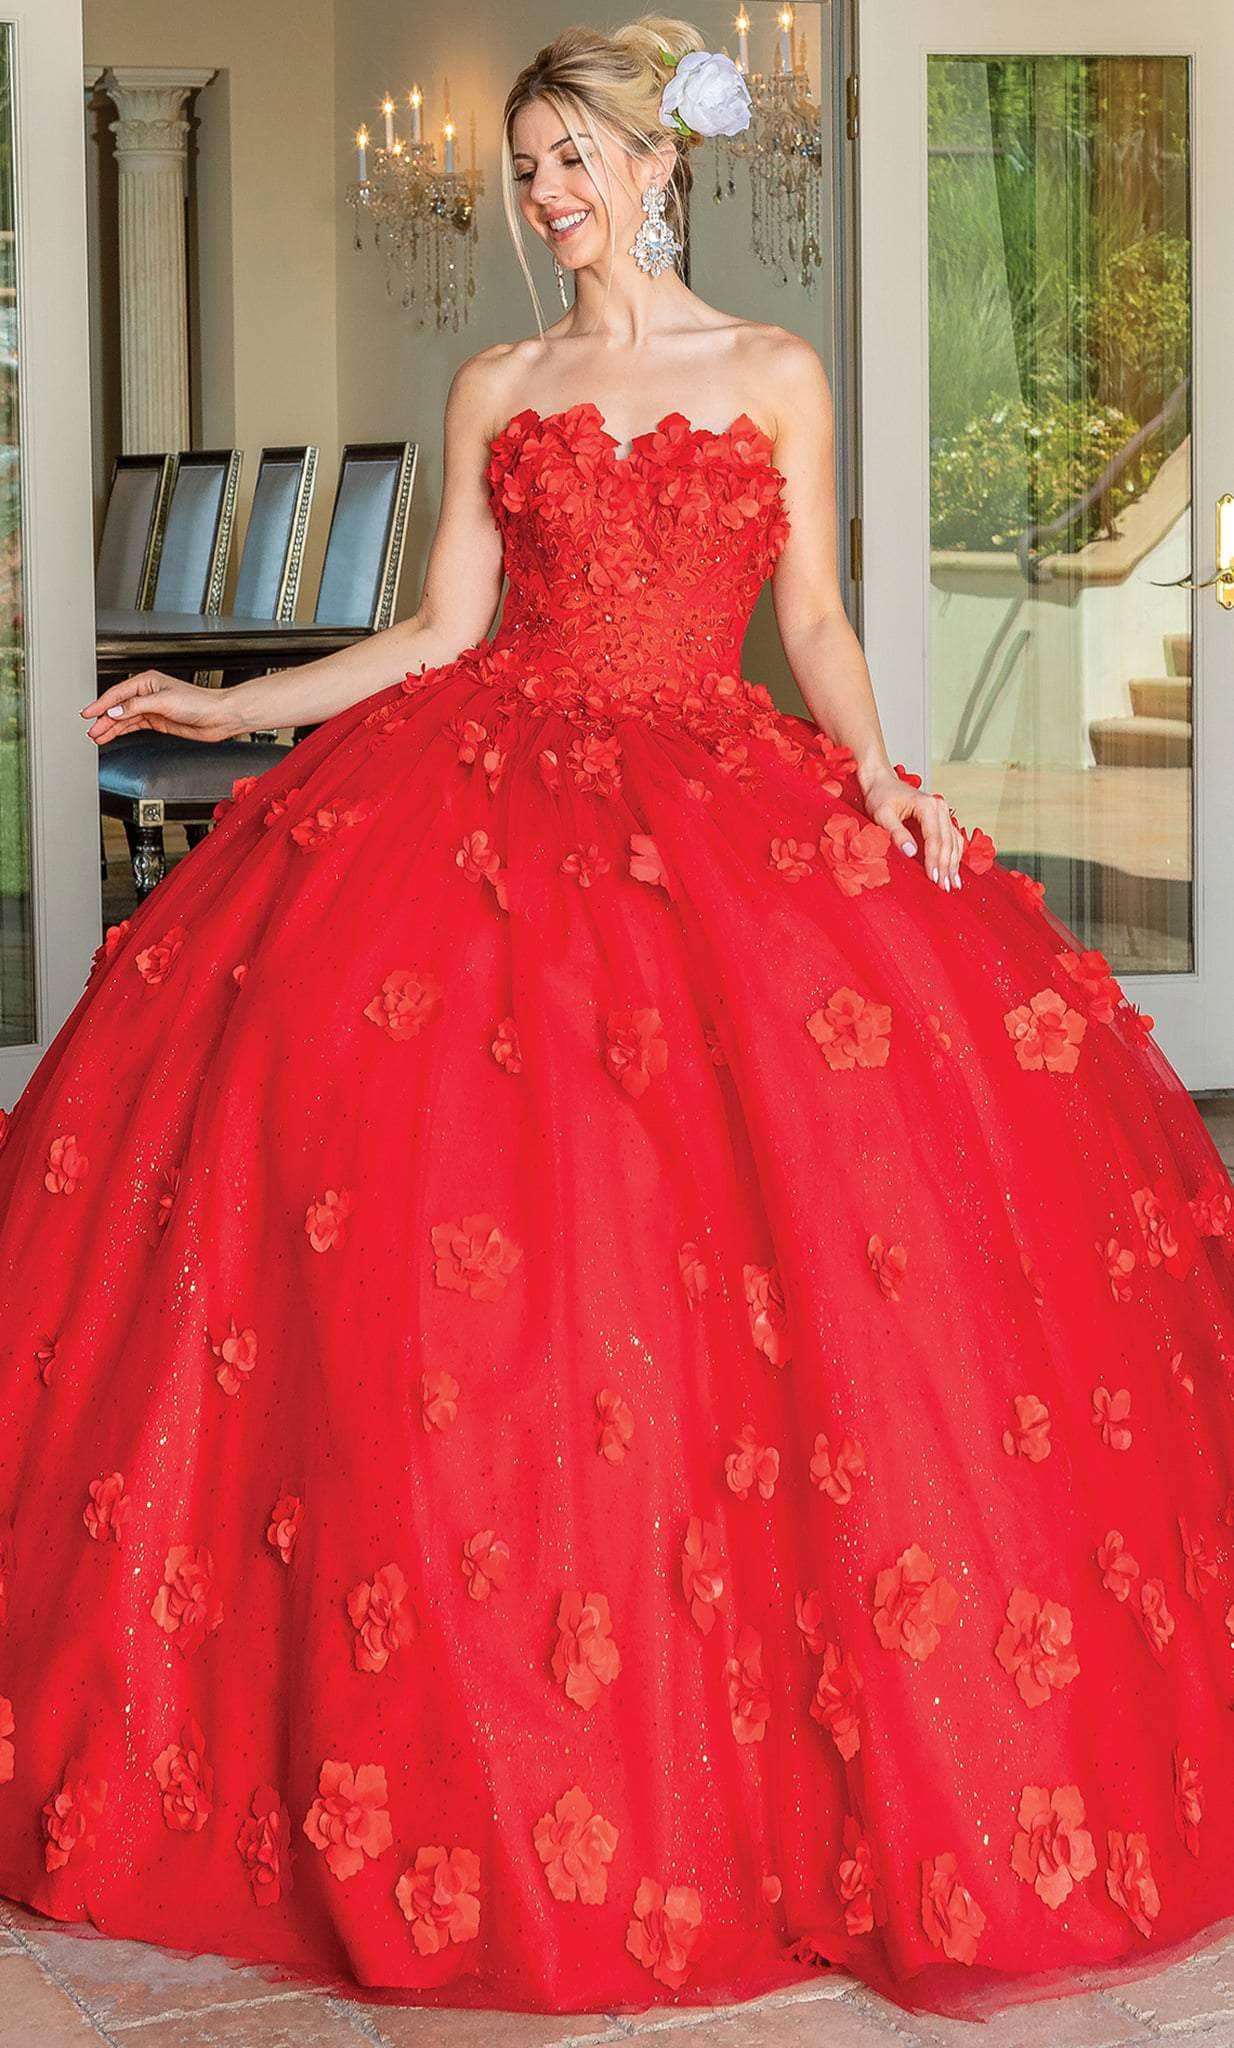 Image of Dancing Queen 1704 - Floral Strapless Ballgown